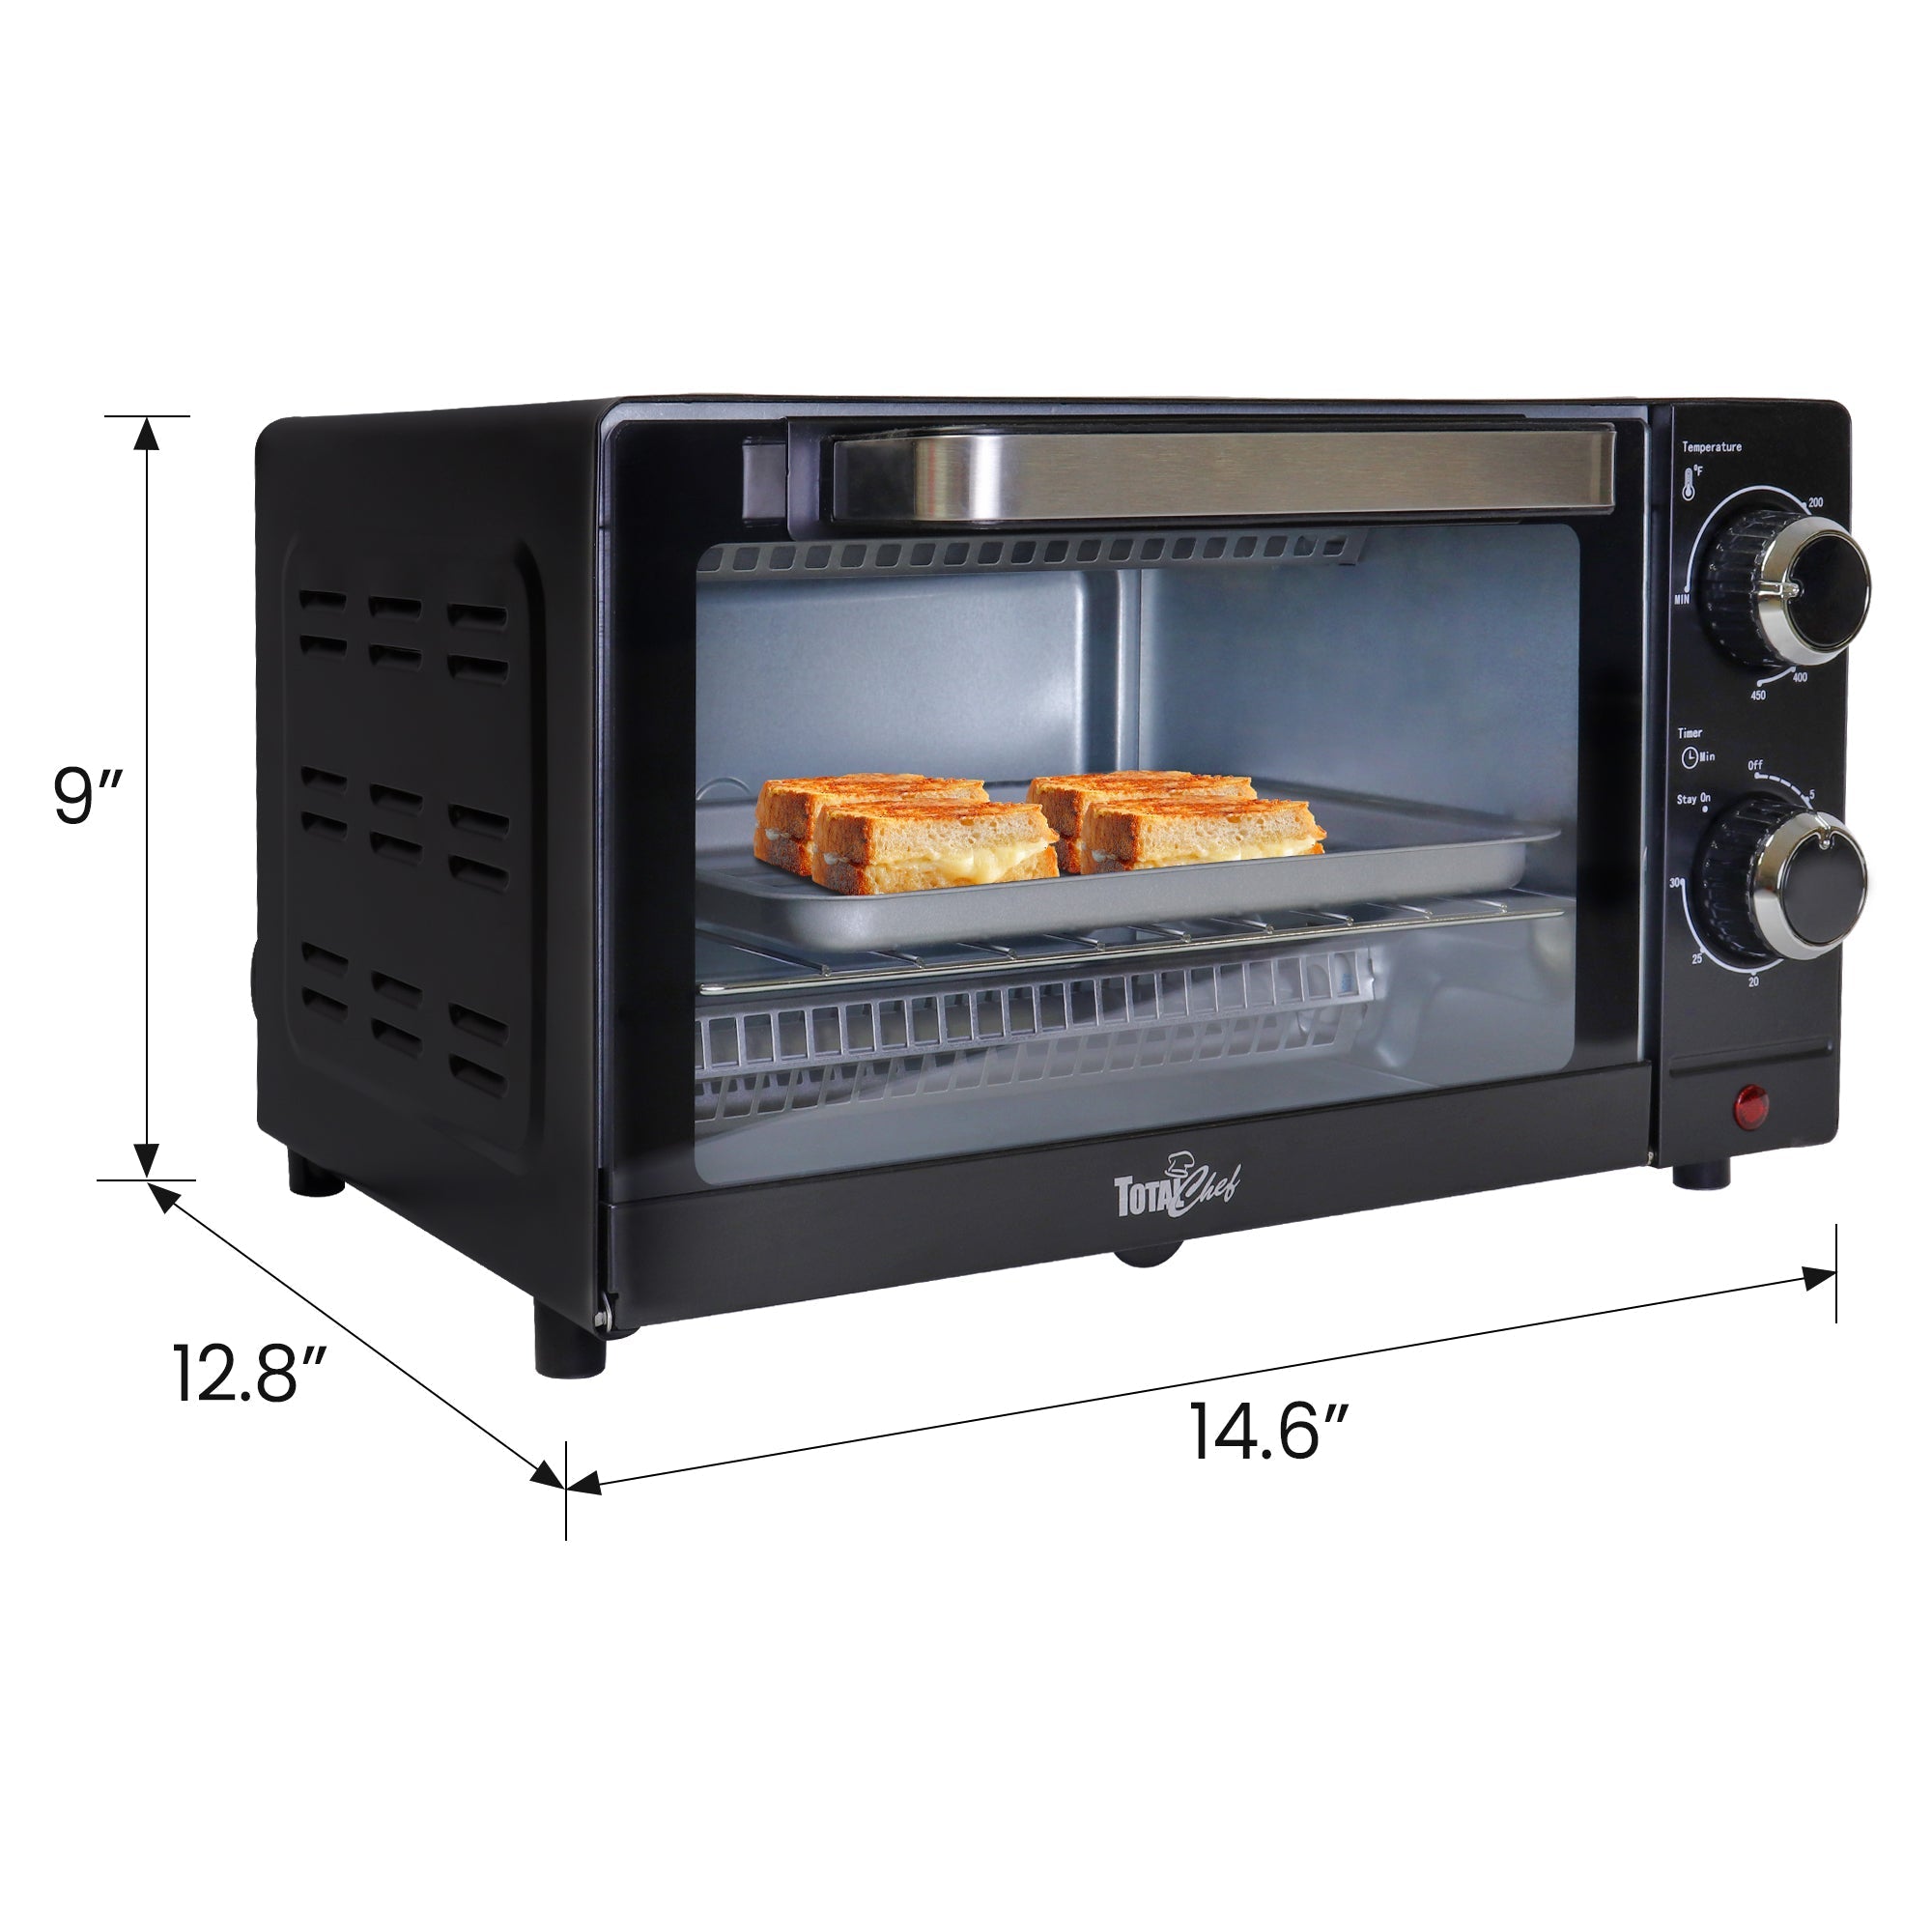 Product shot of toaster oven on white background with dimensions